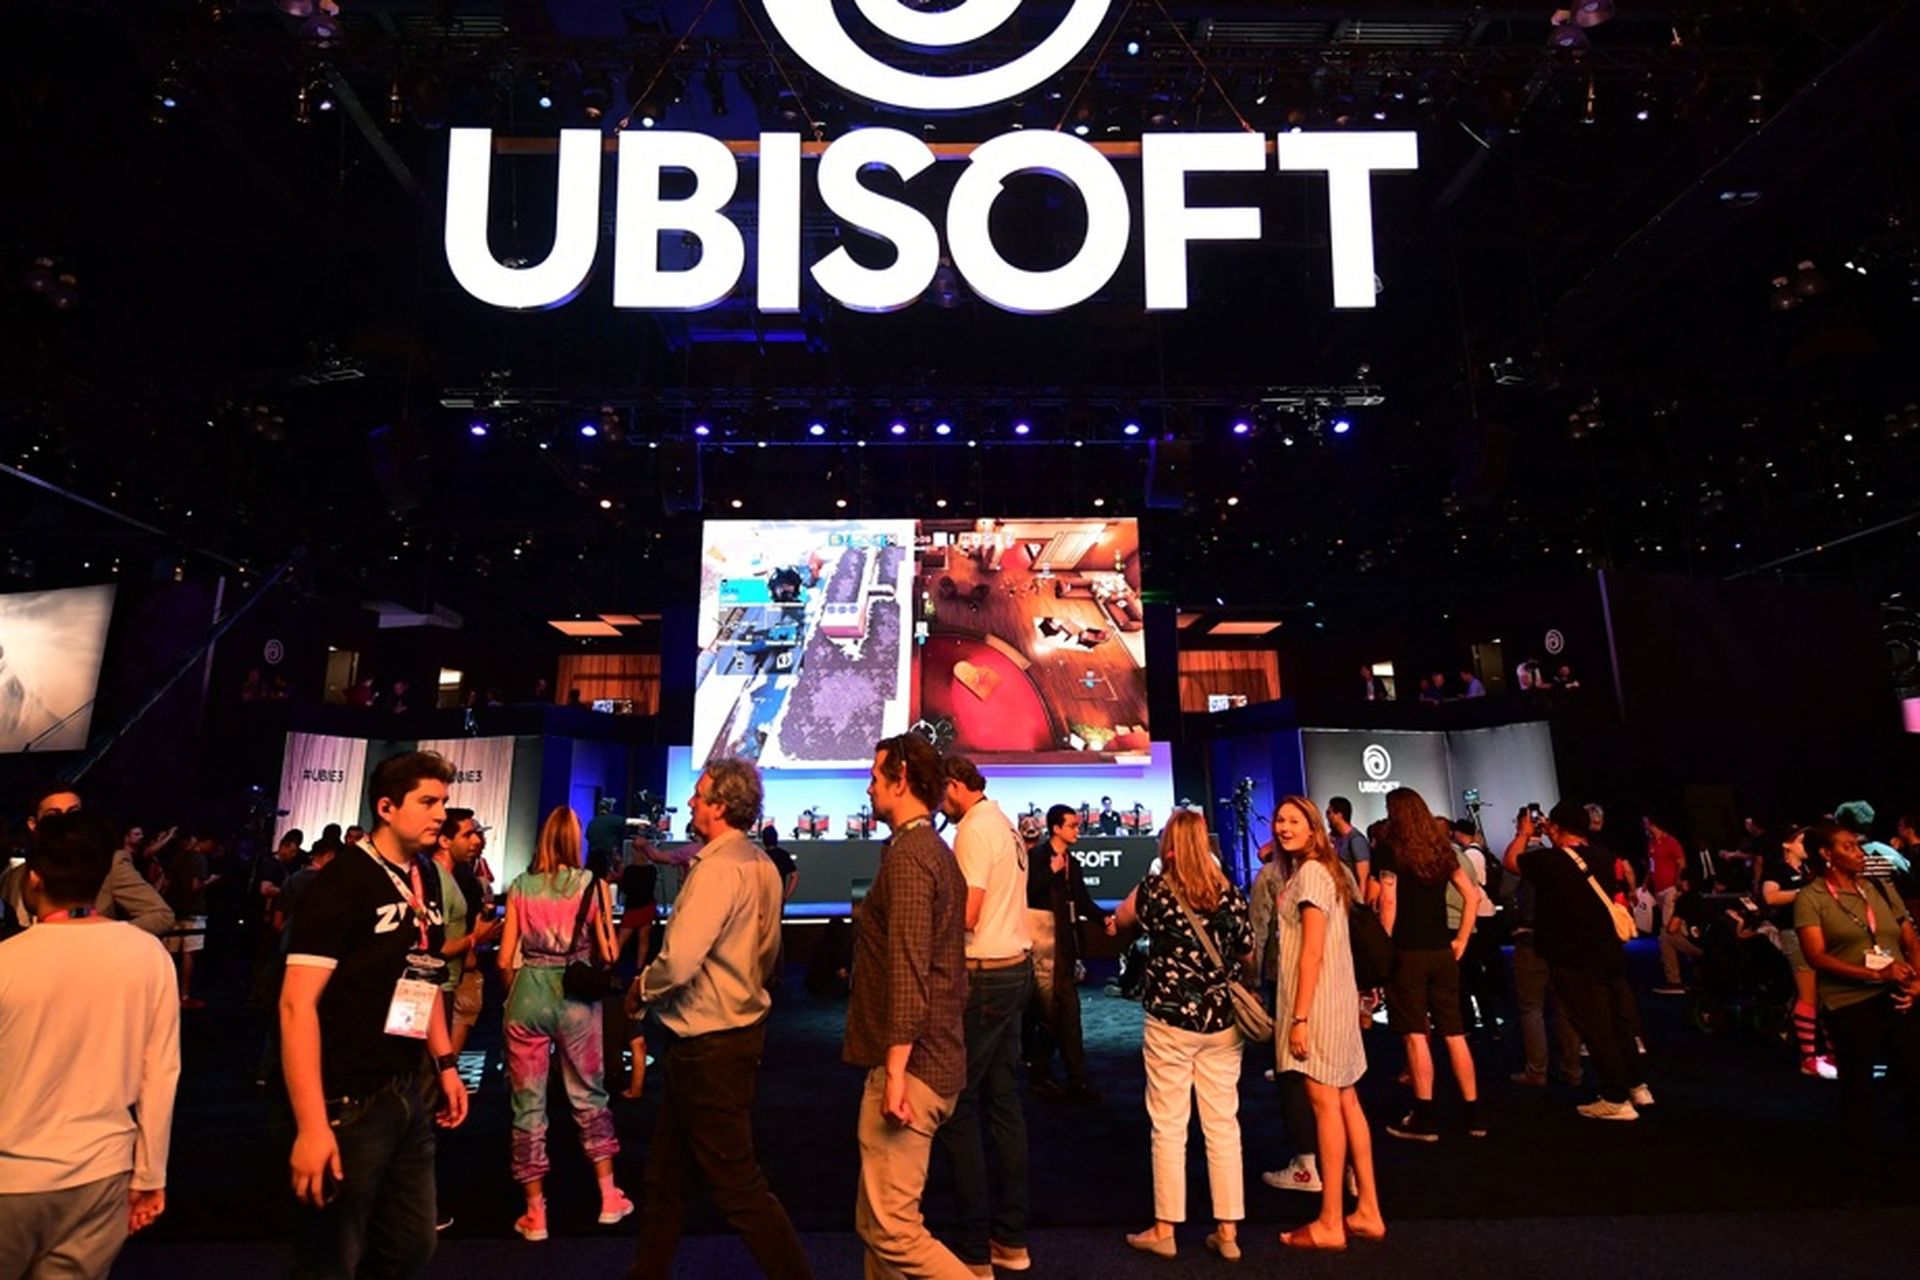 In this article, we are covering the Netflix Ubisoft partnership which aims to further improves gaming offerings from the popular streaming service.